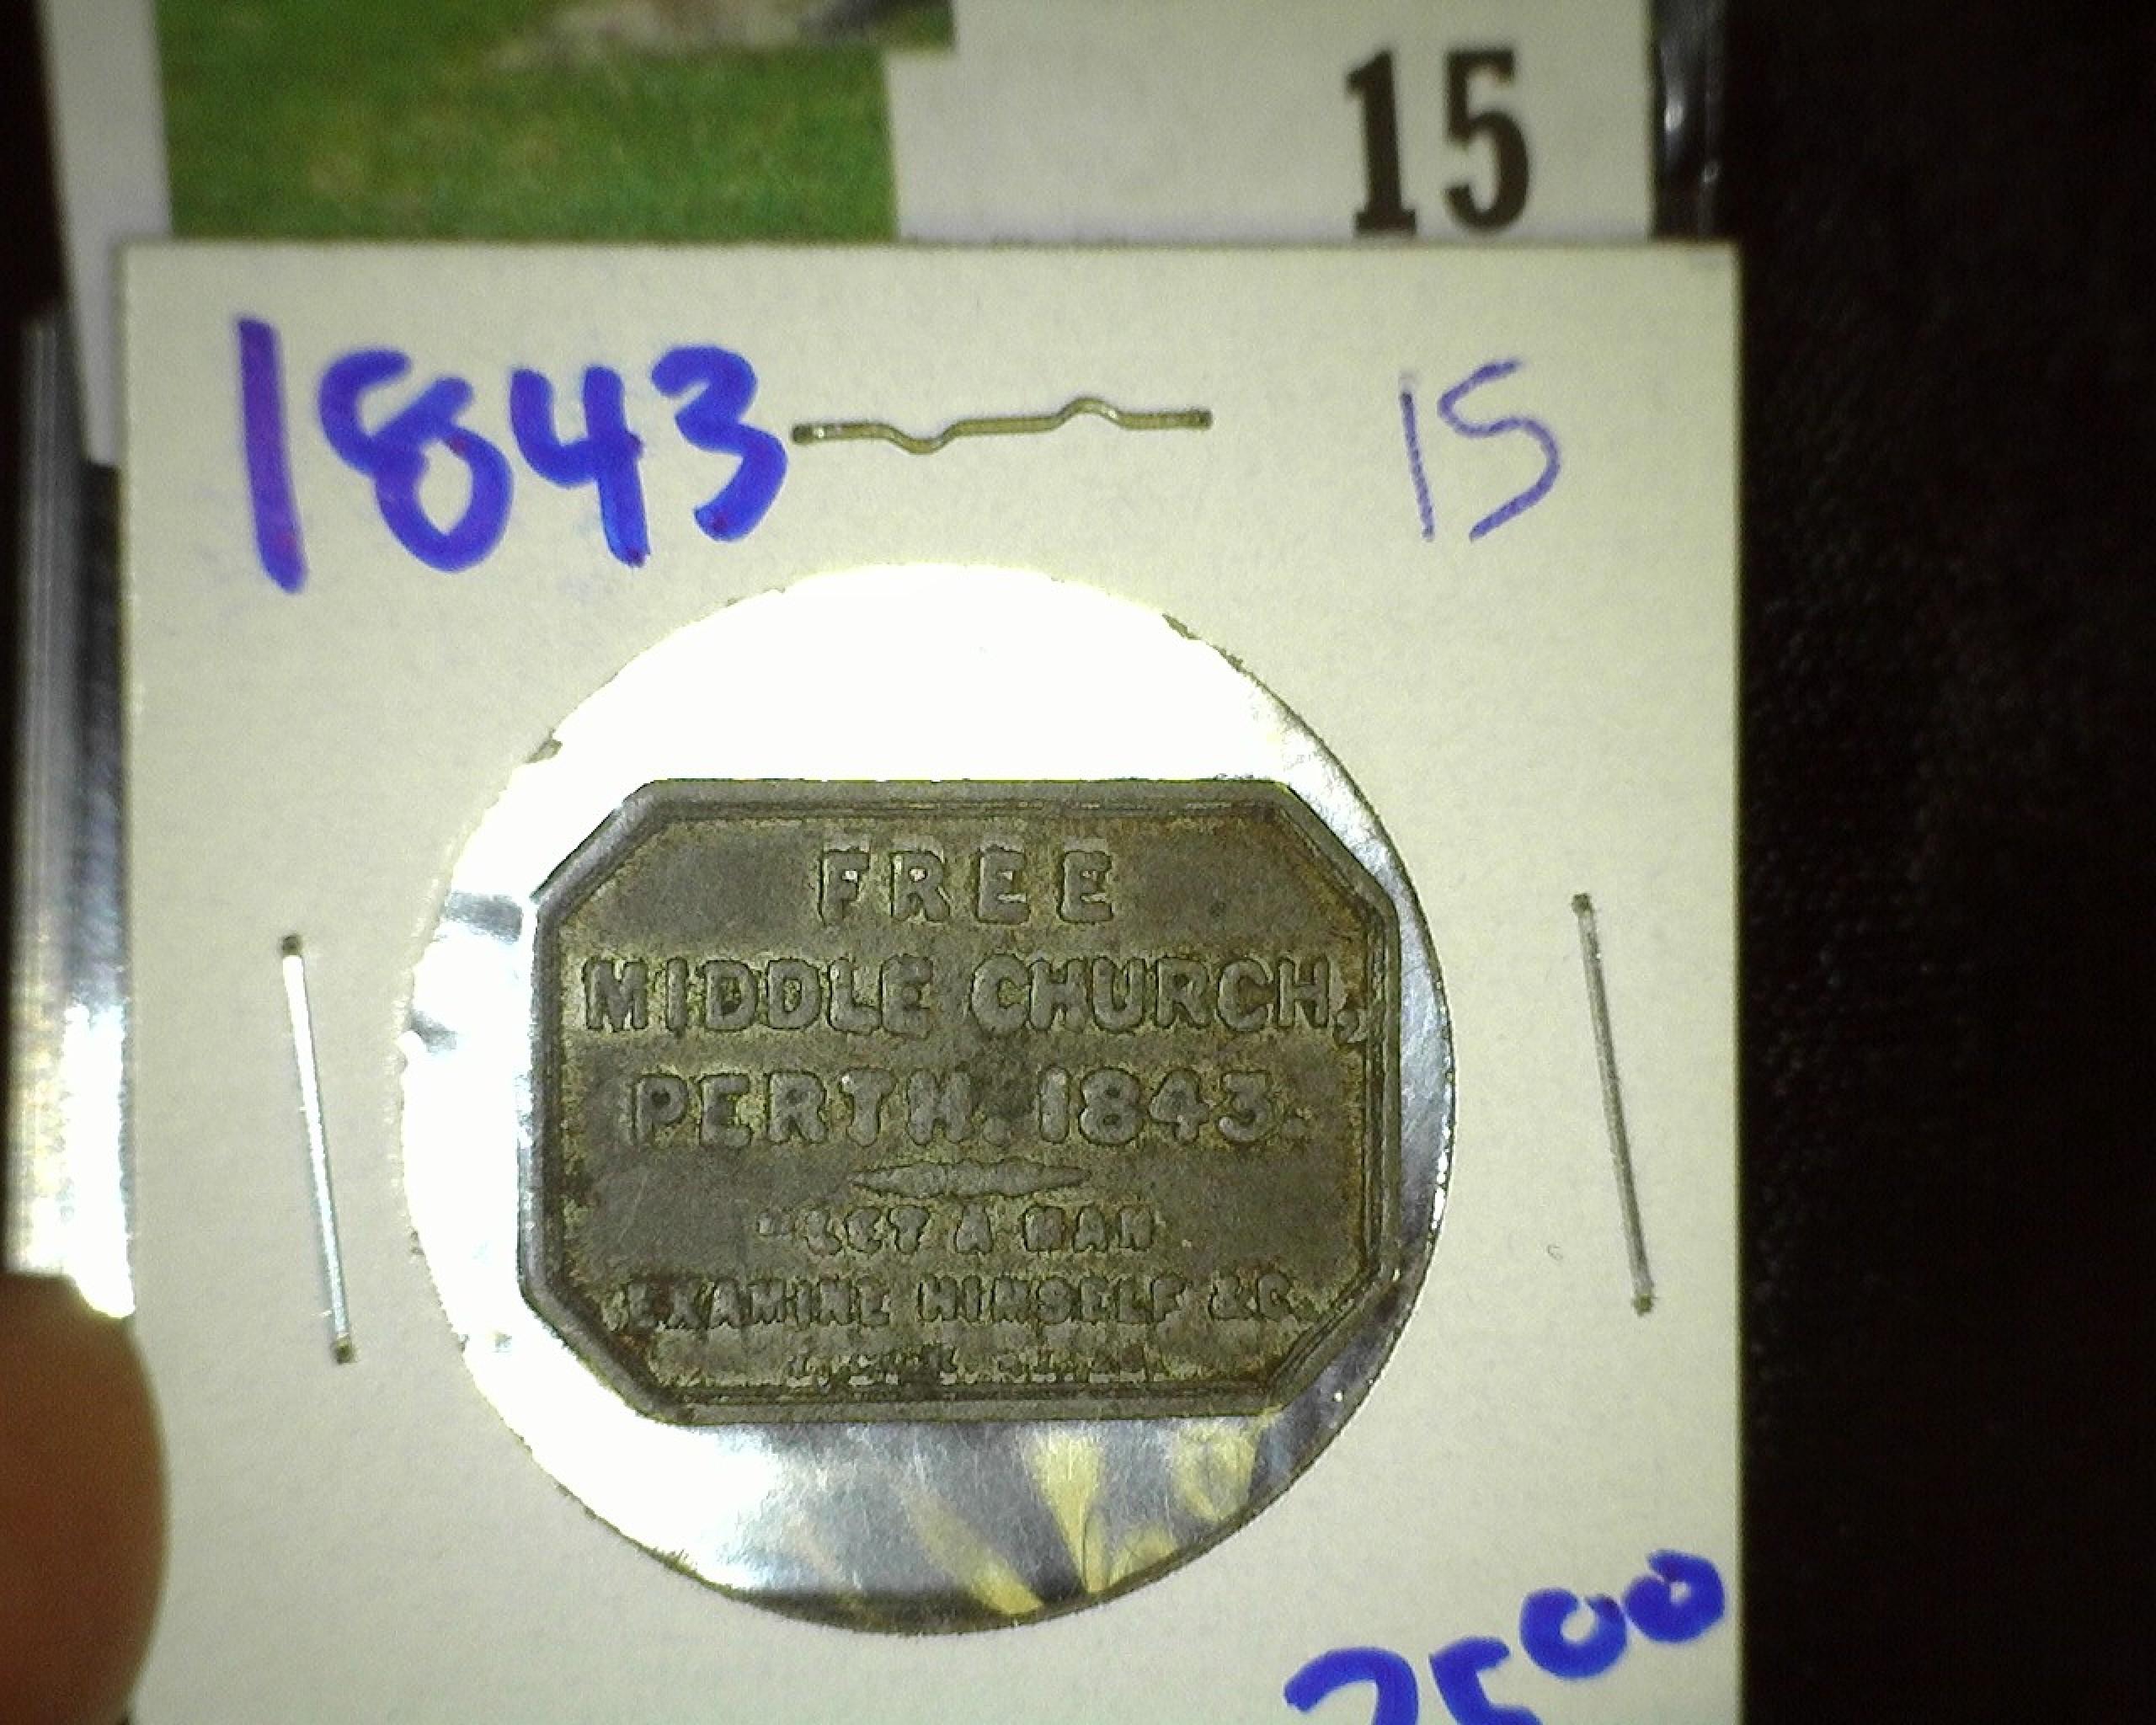 1843 Scottish Communion Token From The Free Middle Church In Perth